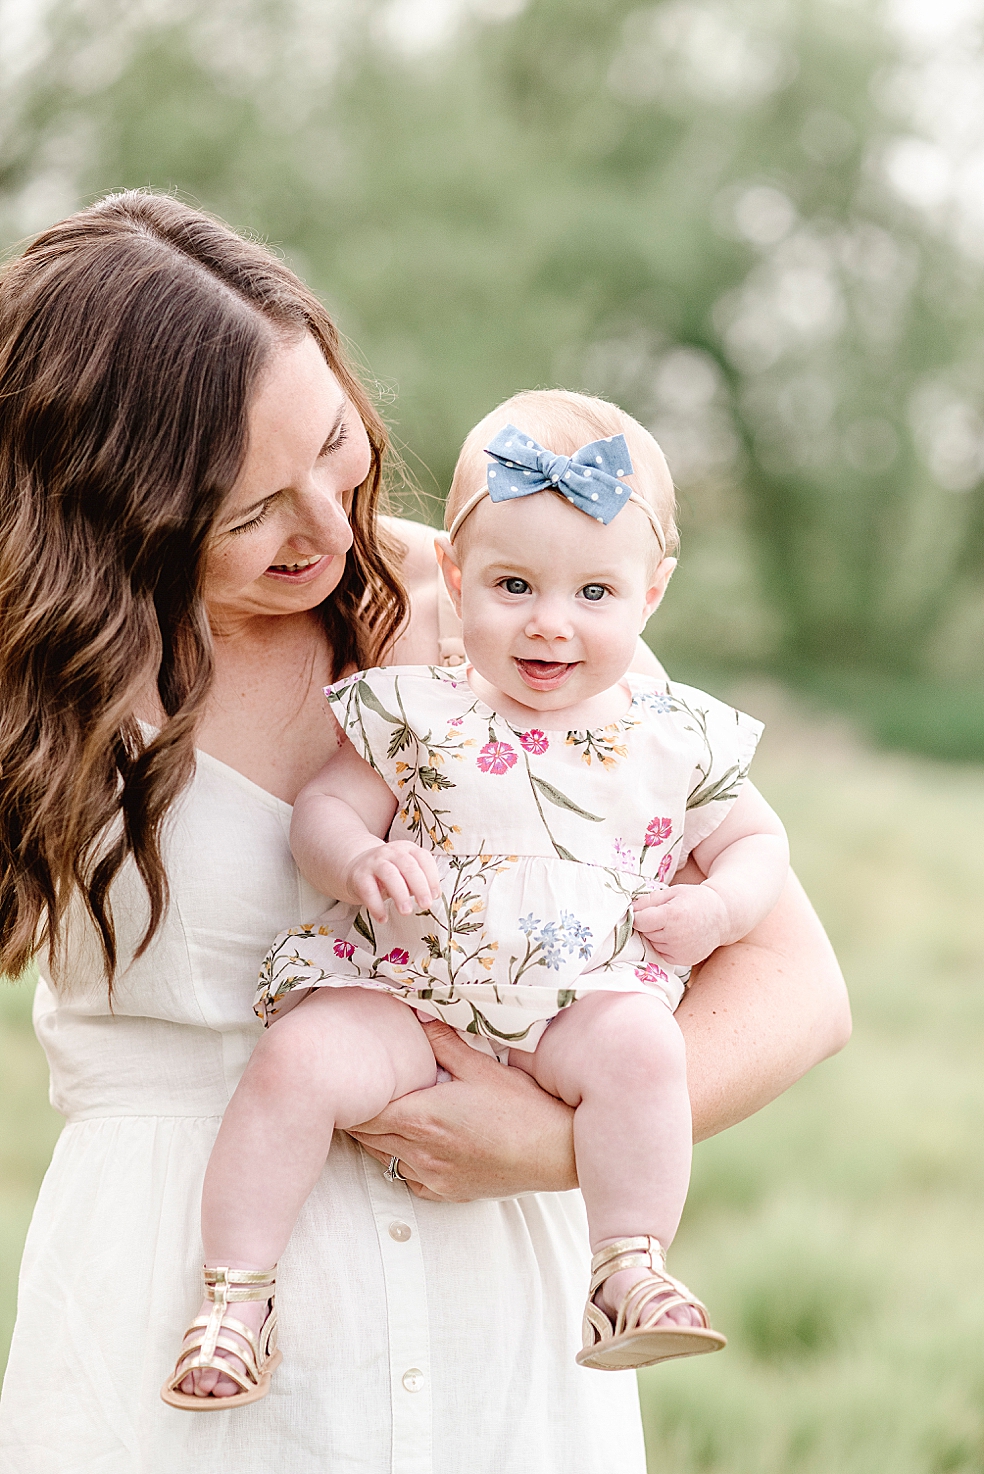 Mom holding her baby girl with a blue headband and floral print dress | Photo by Jessica Lee Photography